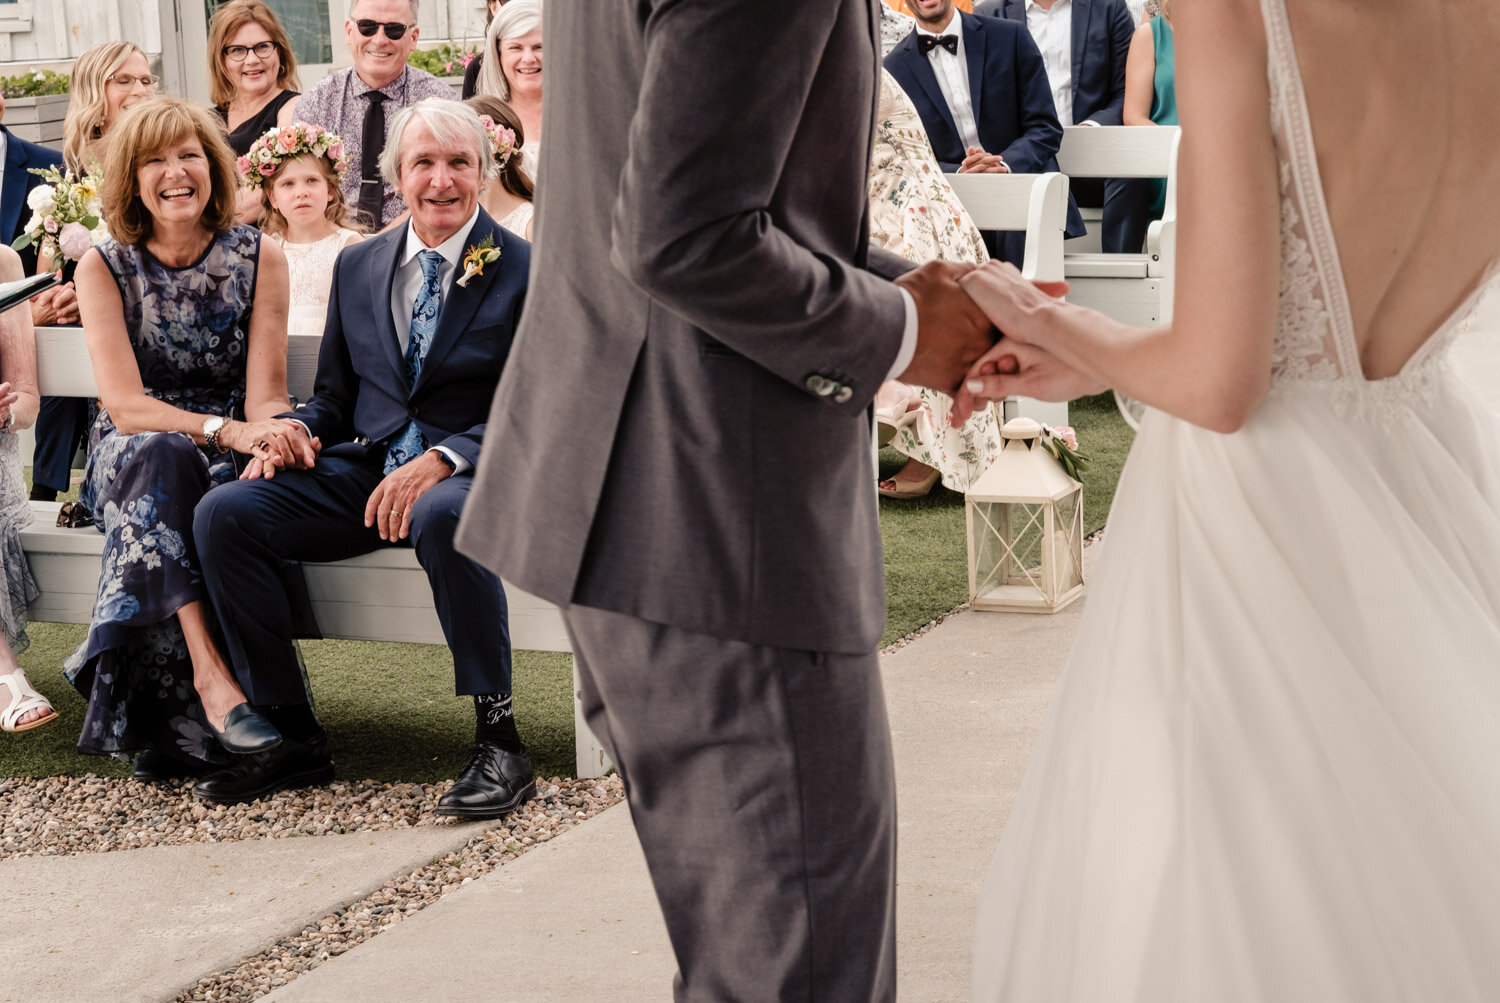 candid storytelling photograph from a wedding